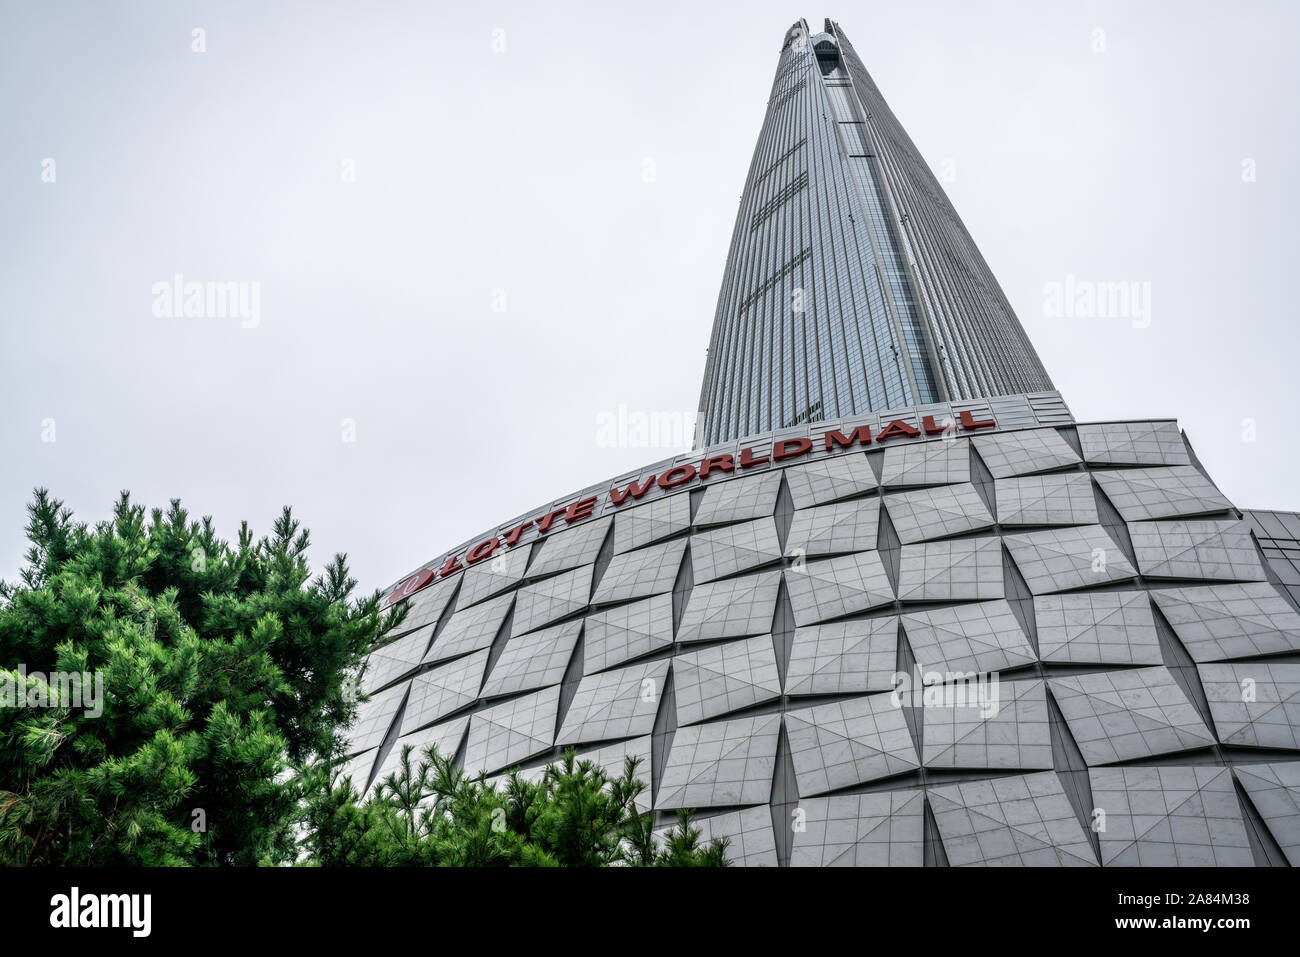 Seoul Korea , 20 September 2019 : Lotte tower mall sign and Lotte World Tower a supertall skyscraper in Seoul South Korea Stock Photo